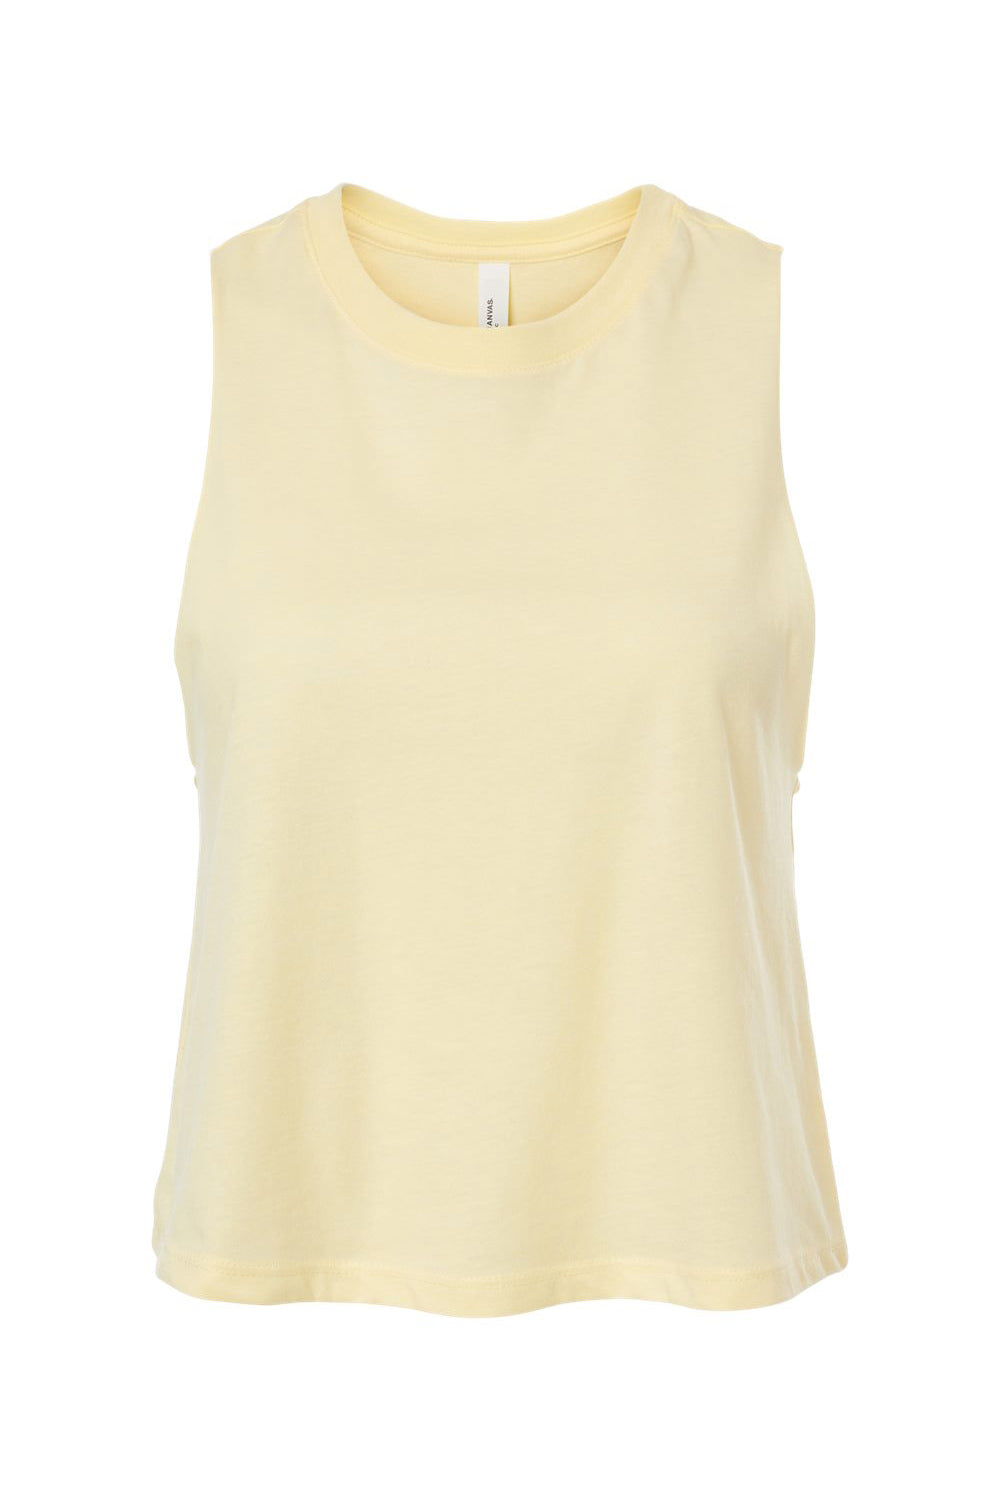 Bella + Canvas BC6682/6682 Womens Cropped Tank Top Heather French Vanilla Flat Front